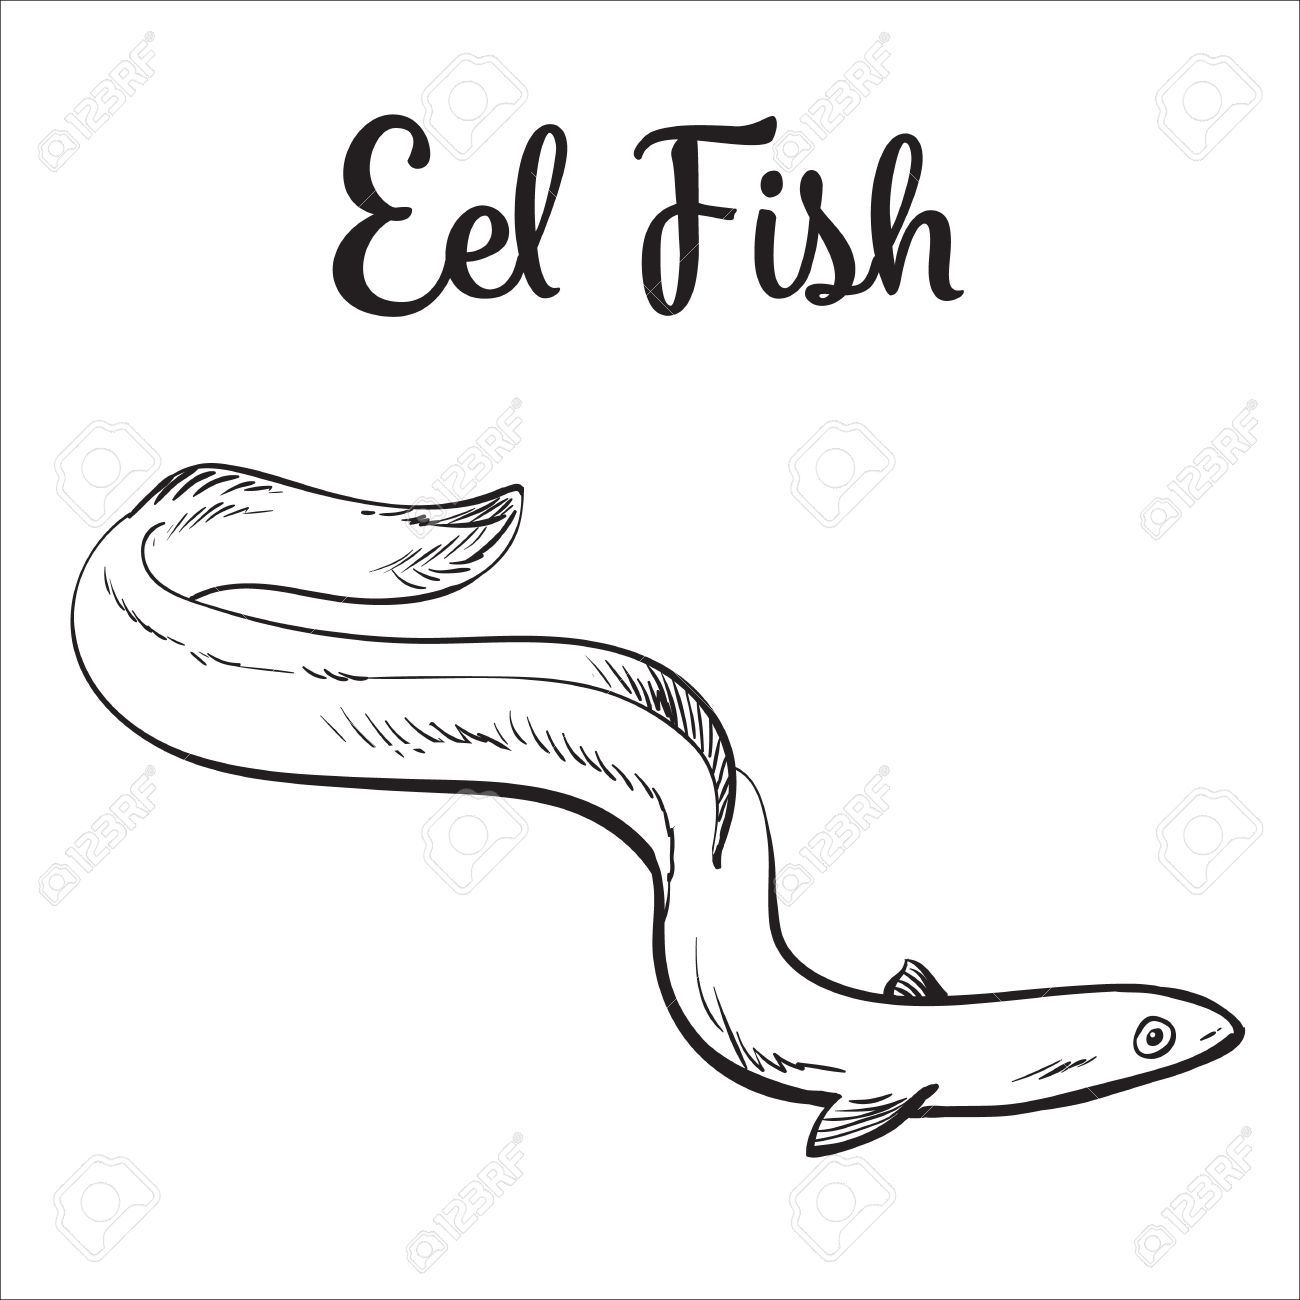 Live Eel Fish Sketch Style Vector Illustration Isolated On White